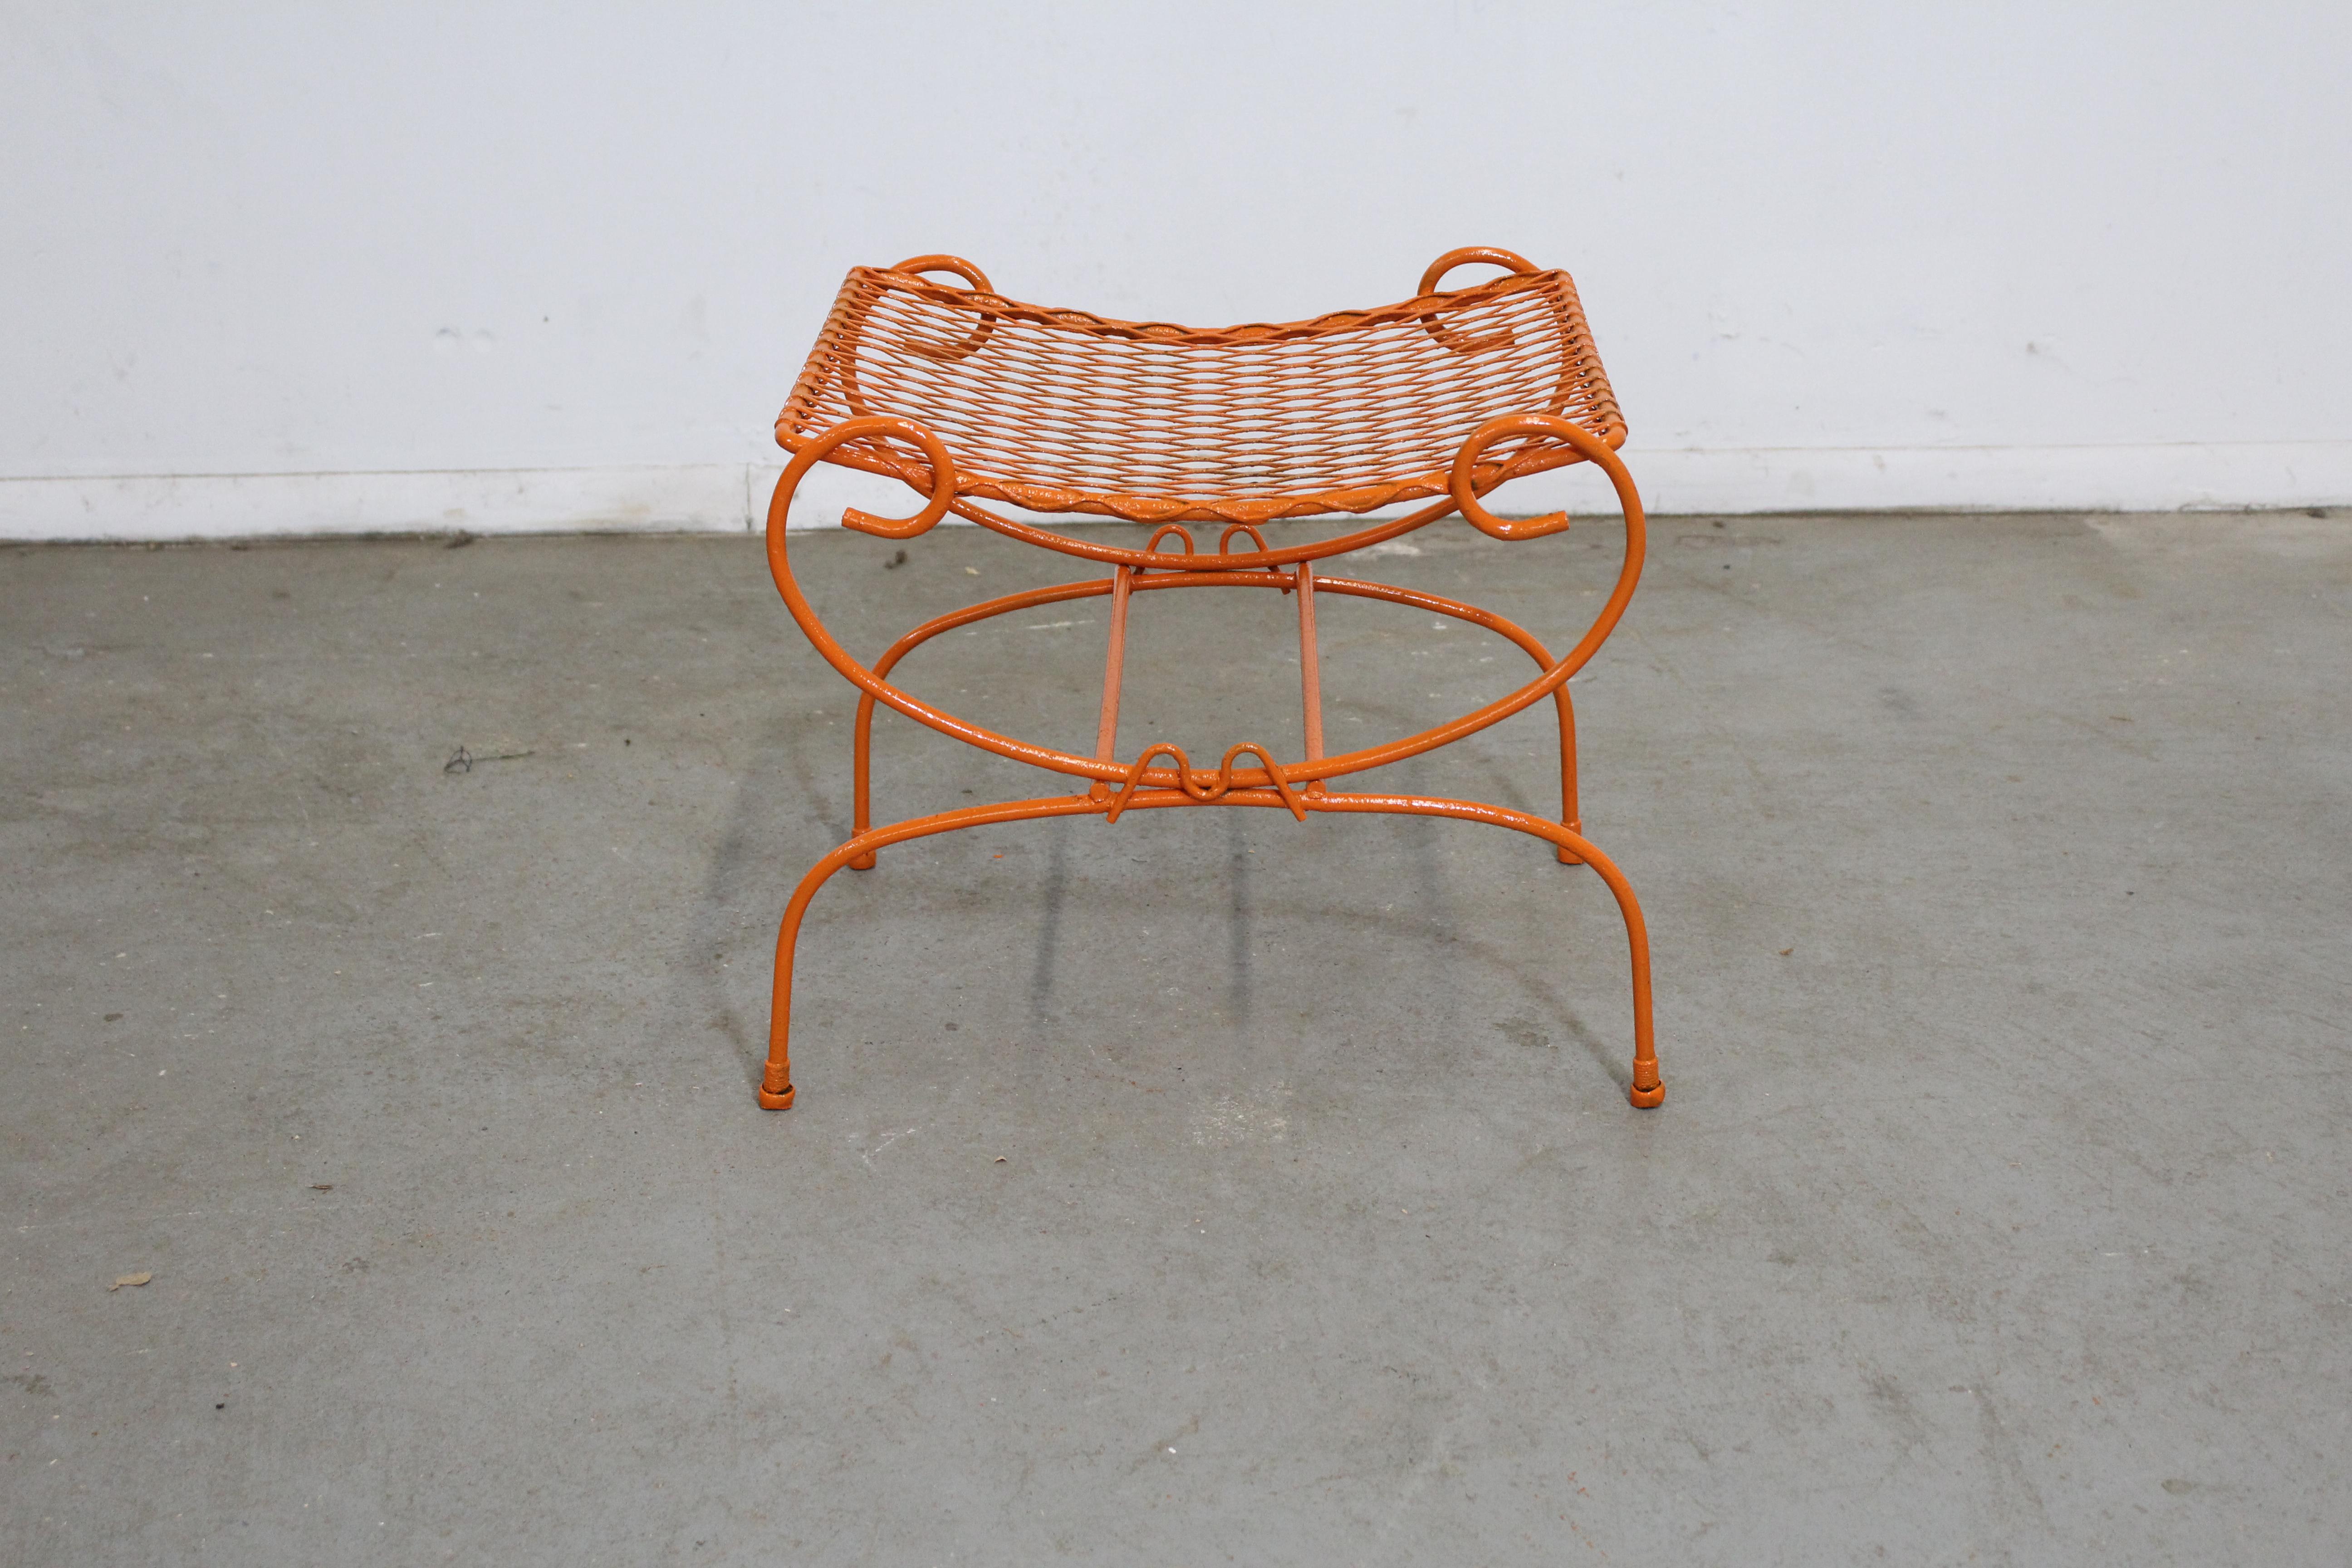 Offered is a vintage Mid-Century Modern atomic orange metal stool, circa 1960's. This piece is made of welded steel and features gracefully styled legs and a mesh top. It is in good condition considering its age with minor age wear (surface wear,